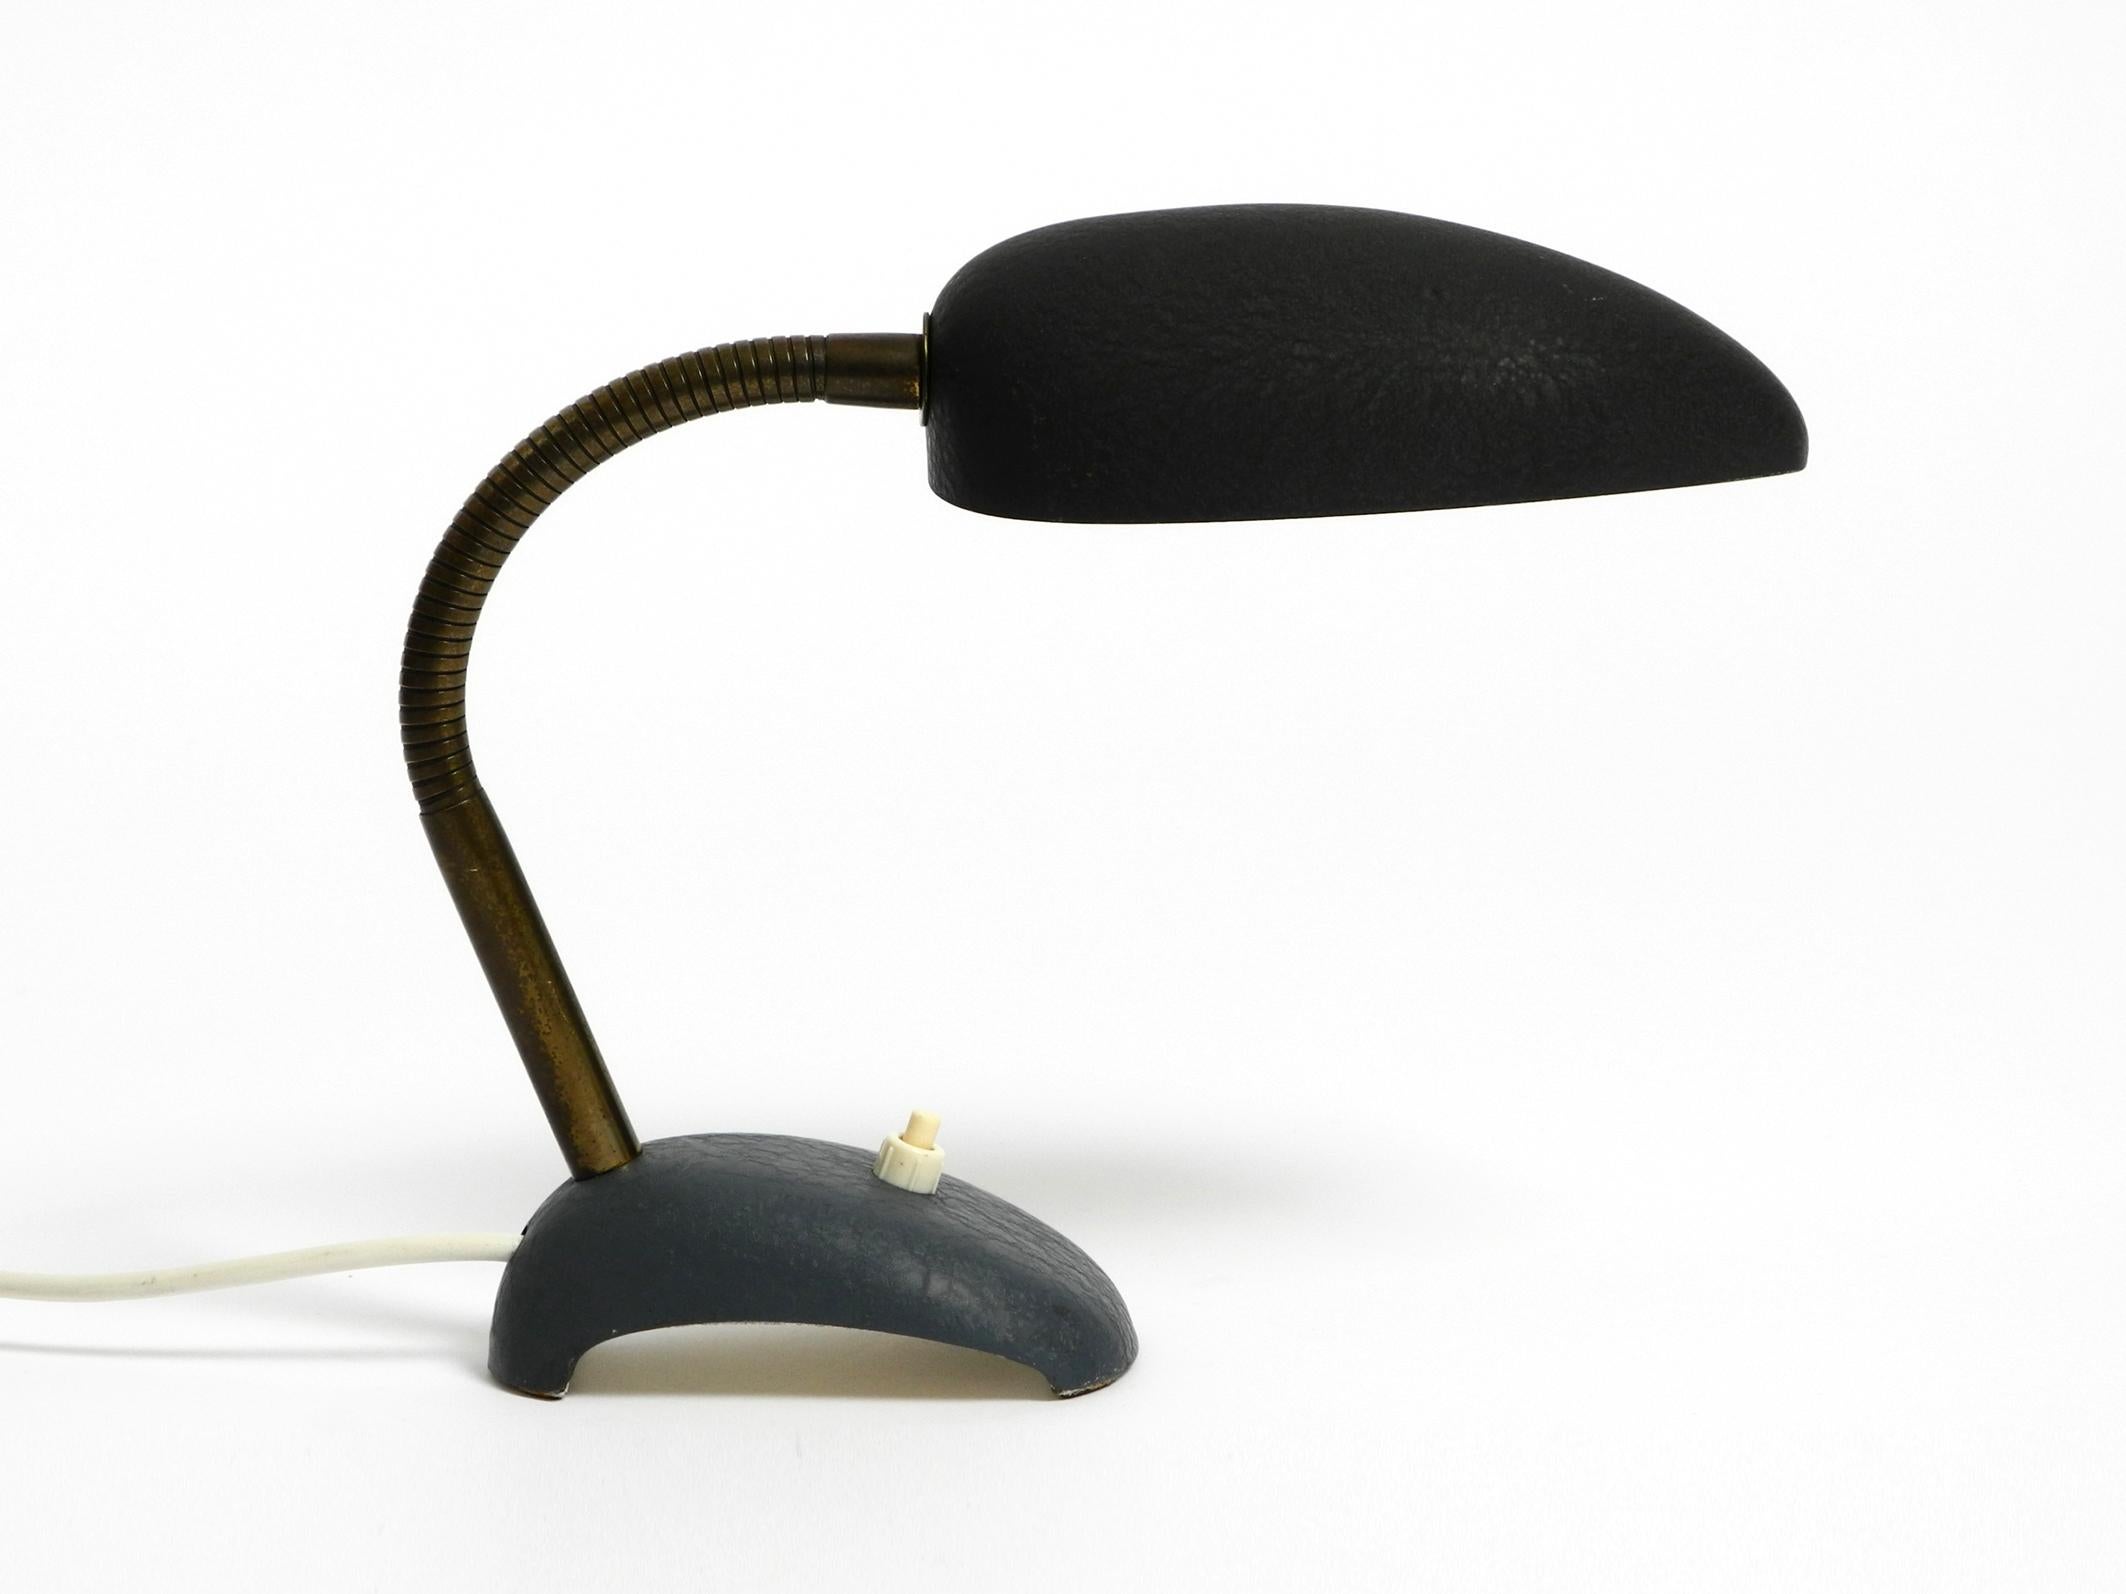 Beautiful small 1950s metal table lamp with brass gooseneck.
Manufacturer is Gebrüder Cosack. Made in Germany.
Black shrink varnish on the shade and grey-blue base.
Shell-shaped lampshade, steplessly adjustable to all sides. Holds in any